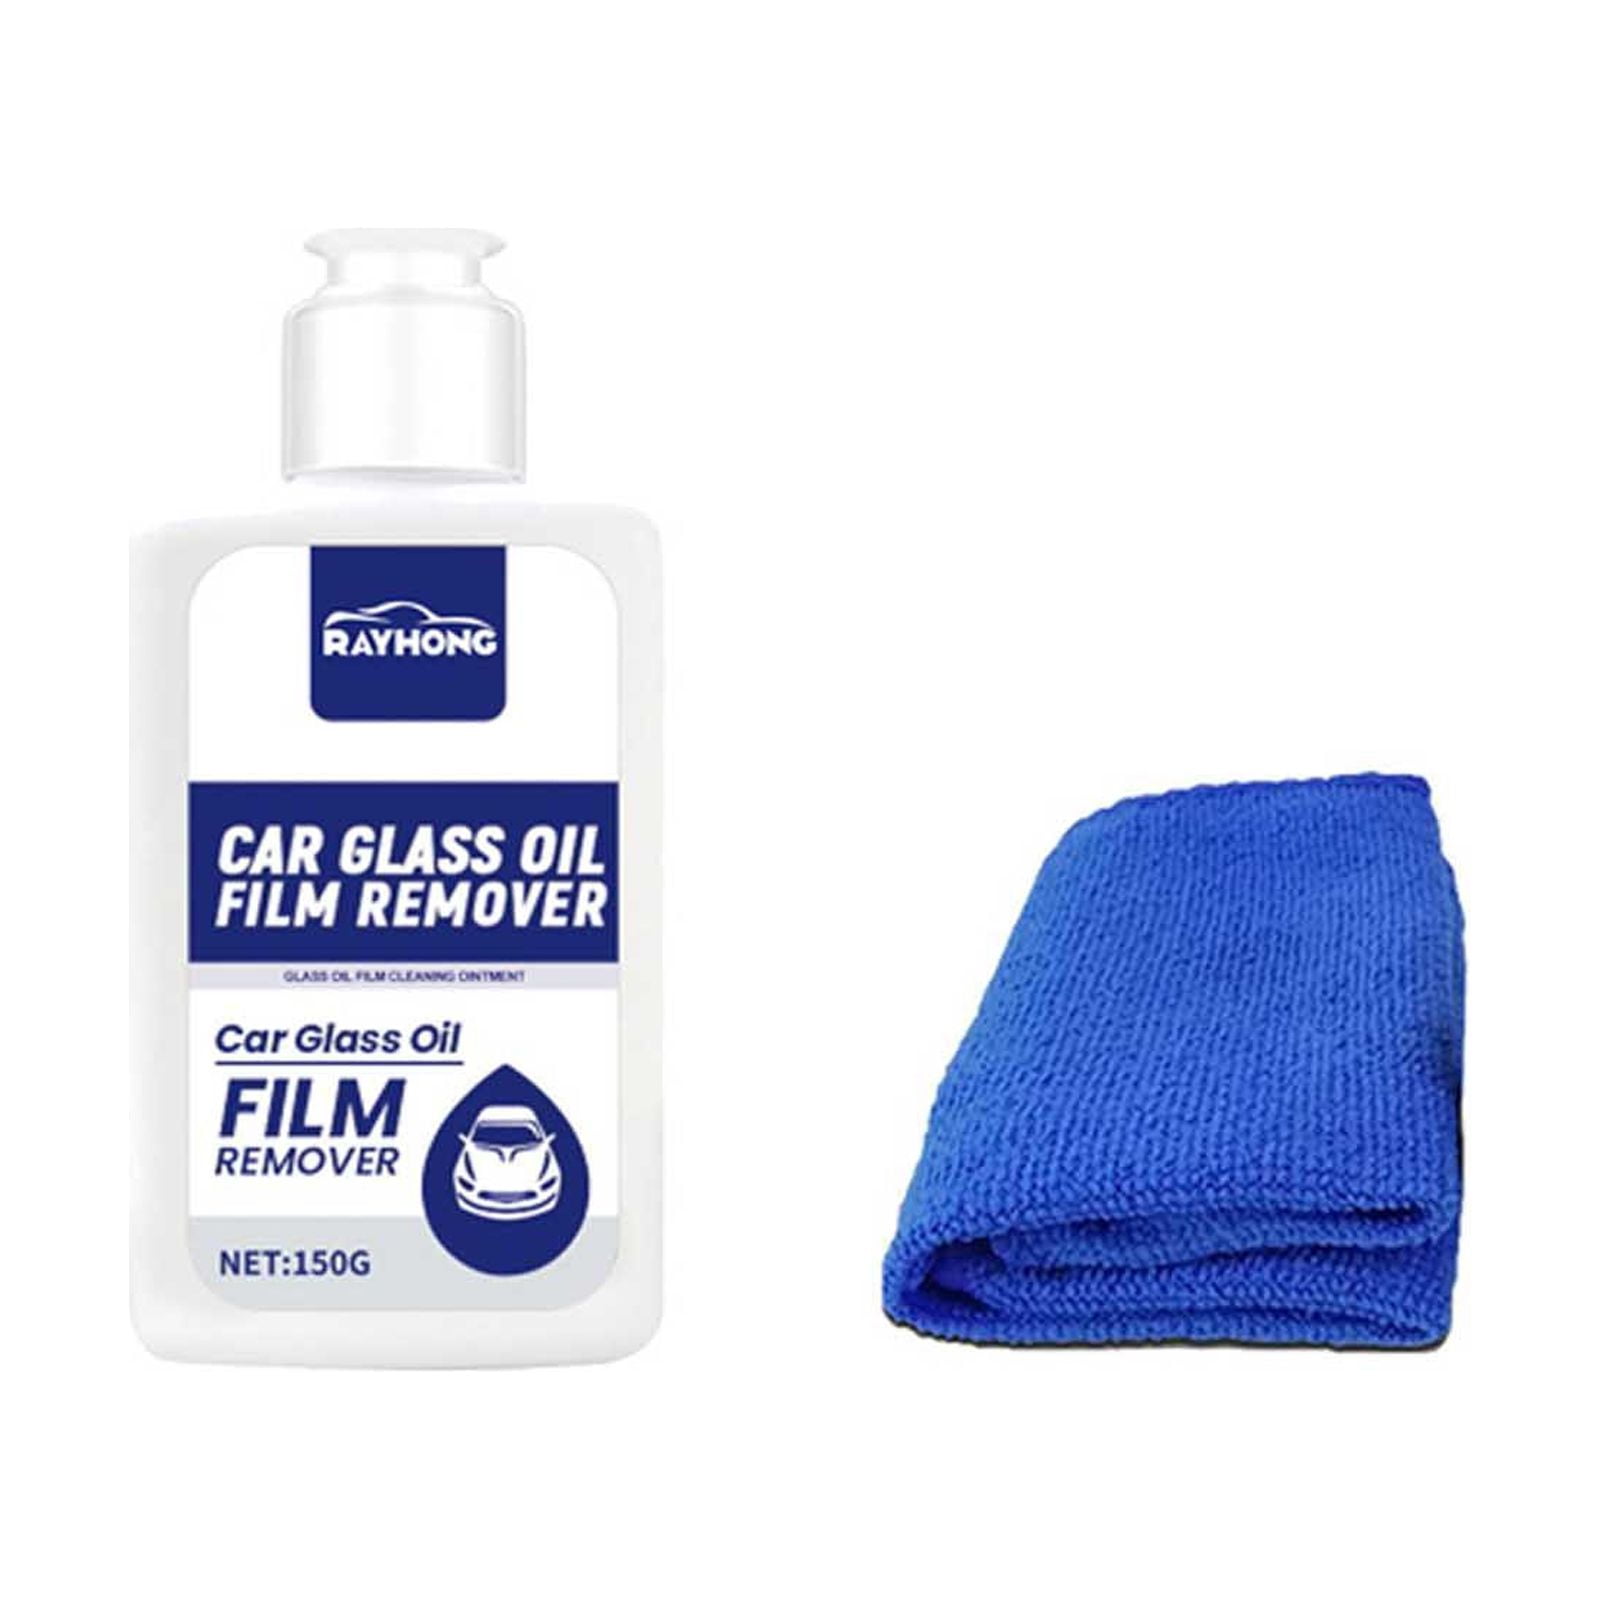 DHZLH Car Glass Oil Film Cleaner, Glass Oil Film Remover for Car, Glass  Film Removal Cream